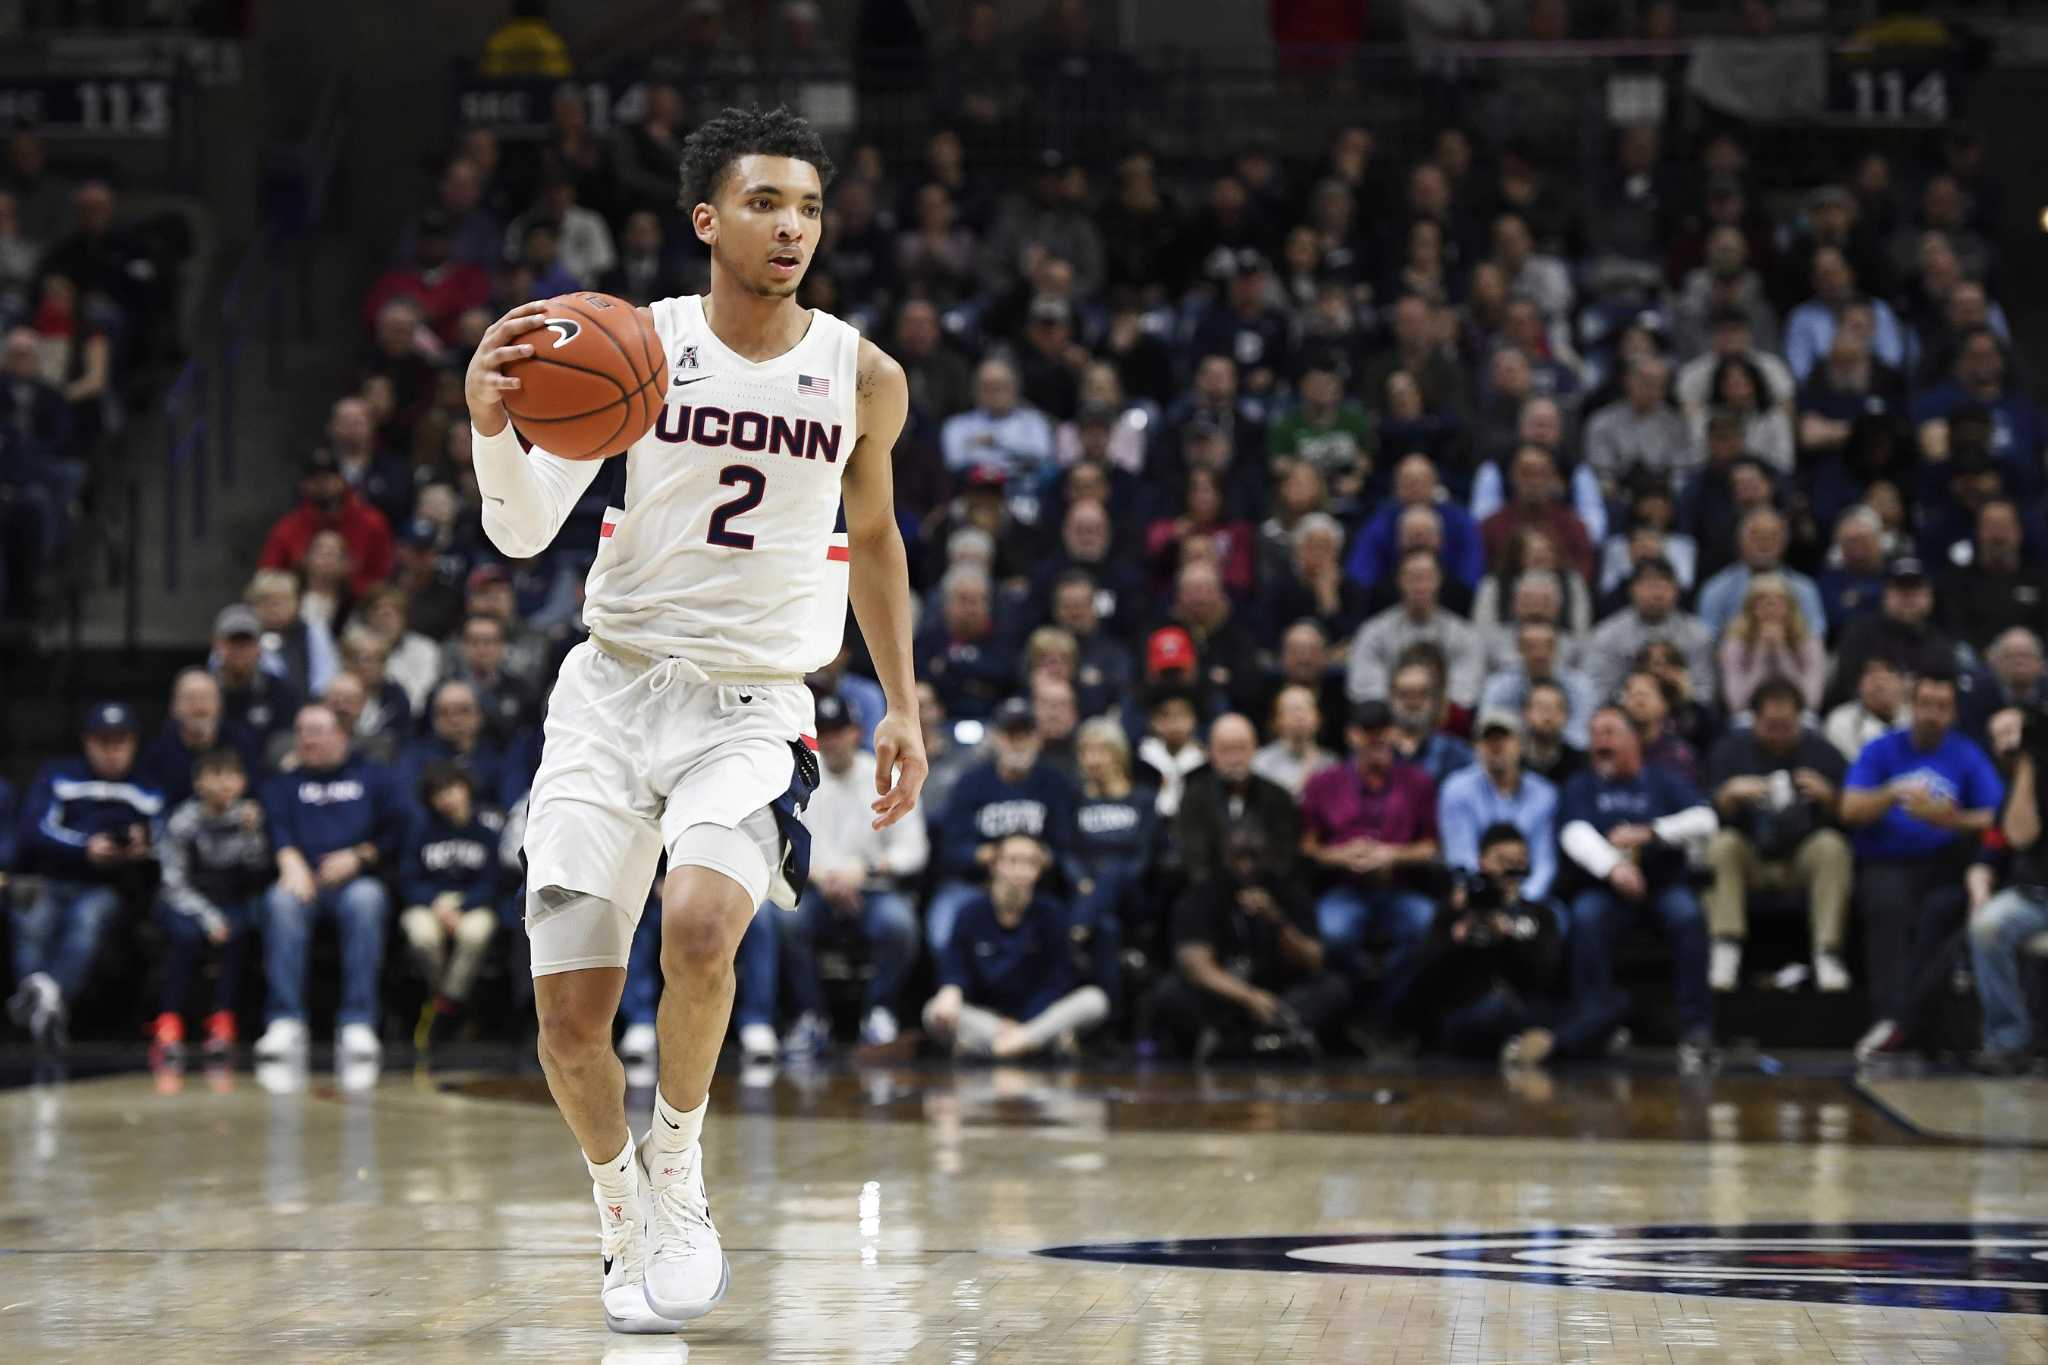 Has James Bouknight already emerged as UConn's go-to guy?